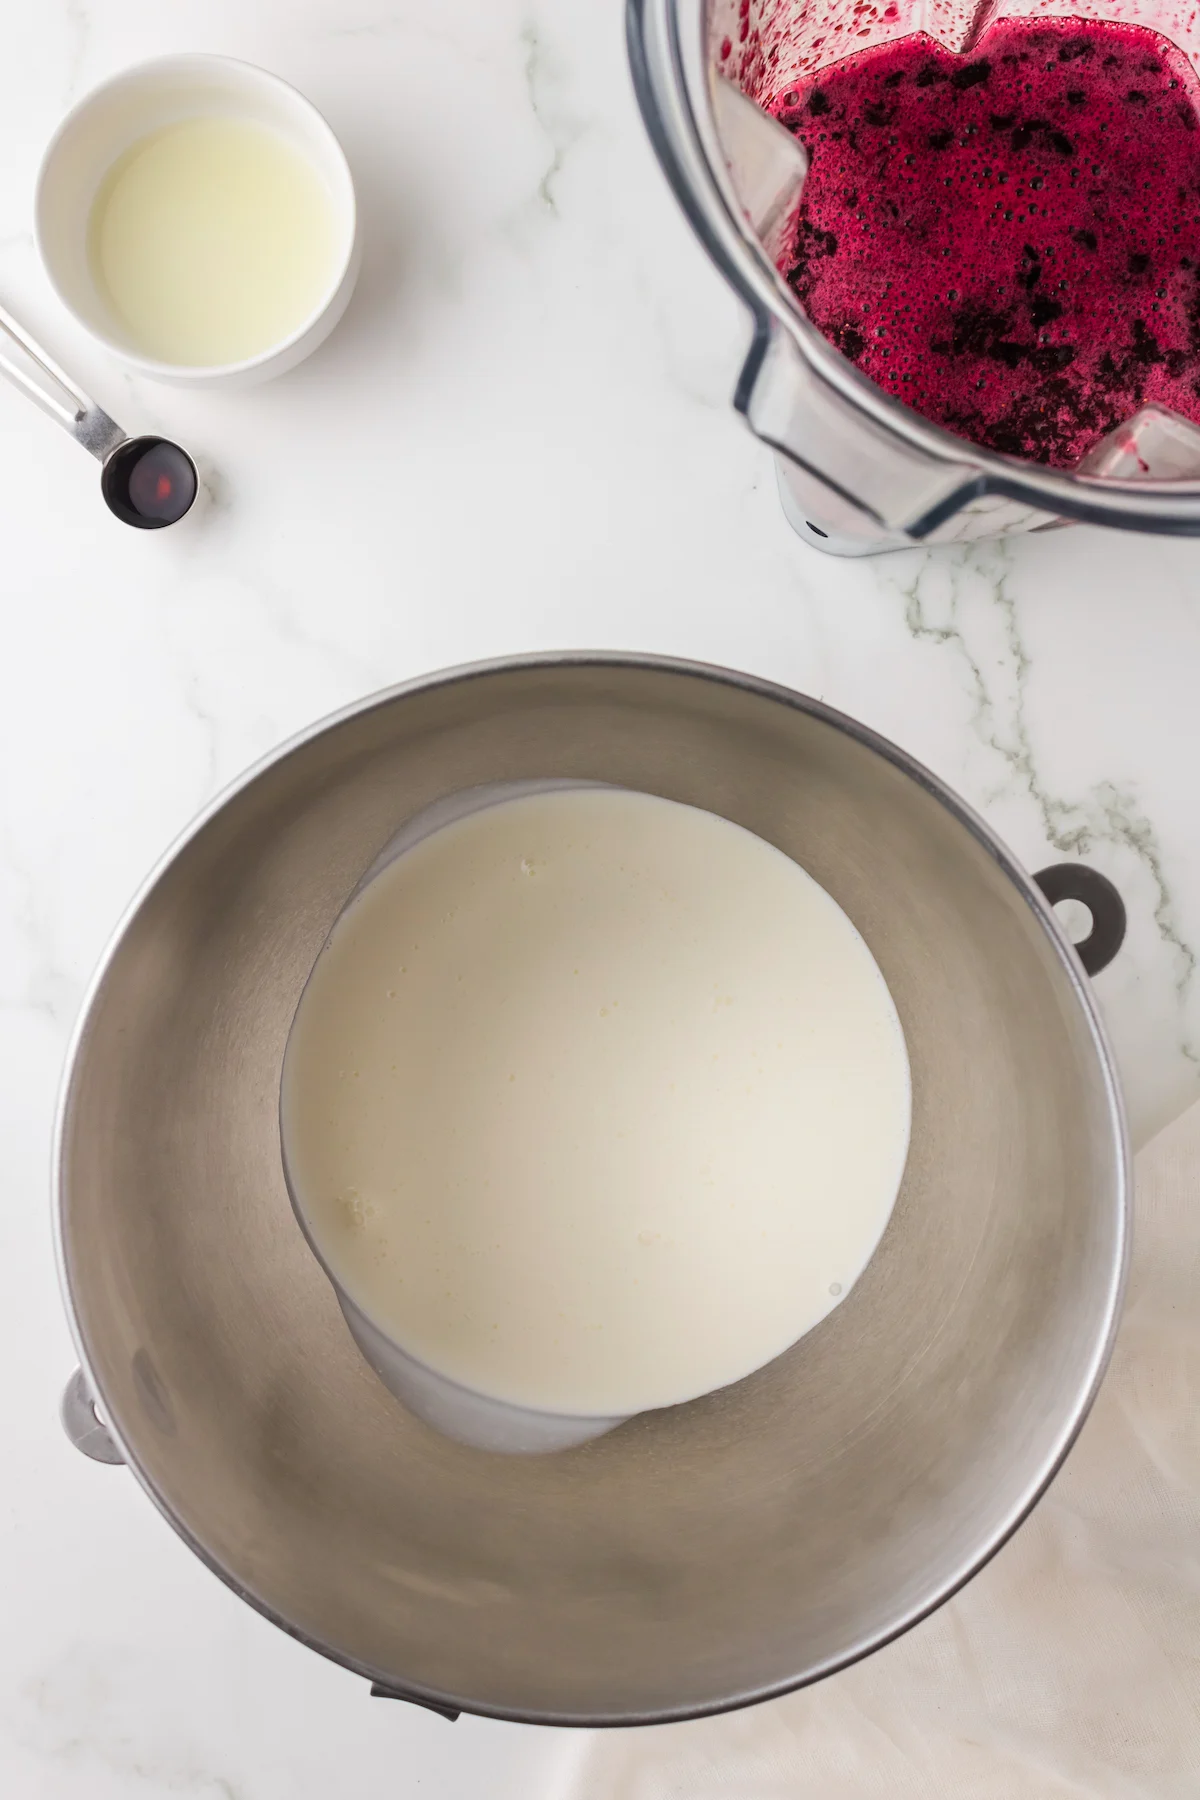 Heavy cream in a metal bowl